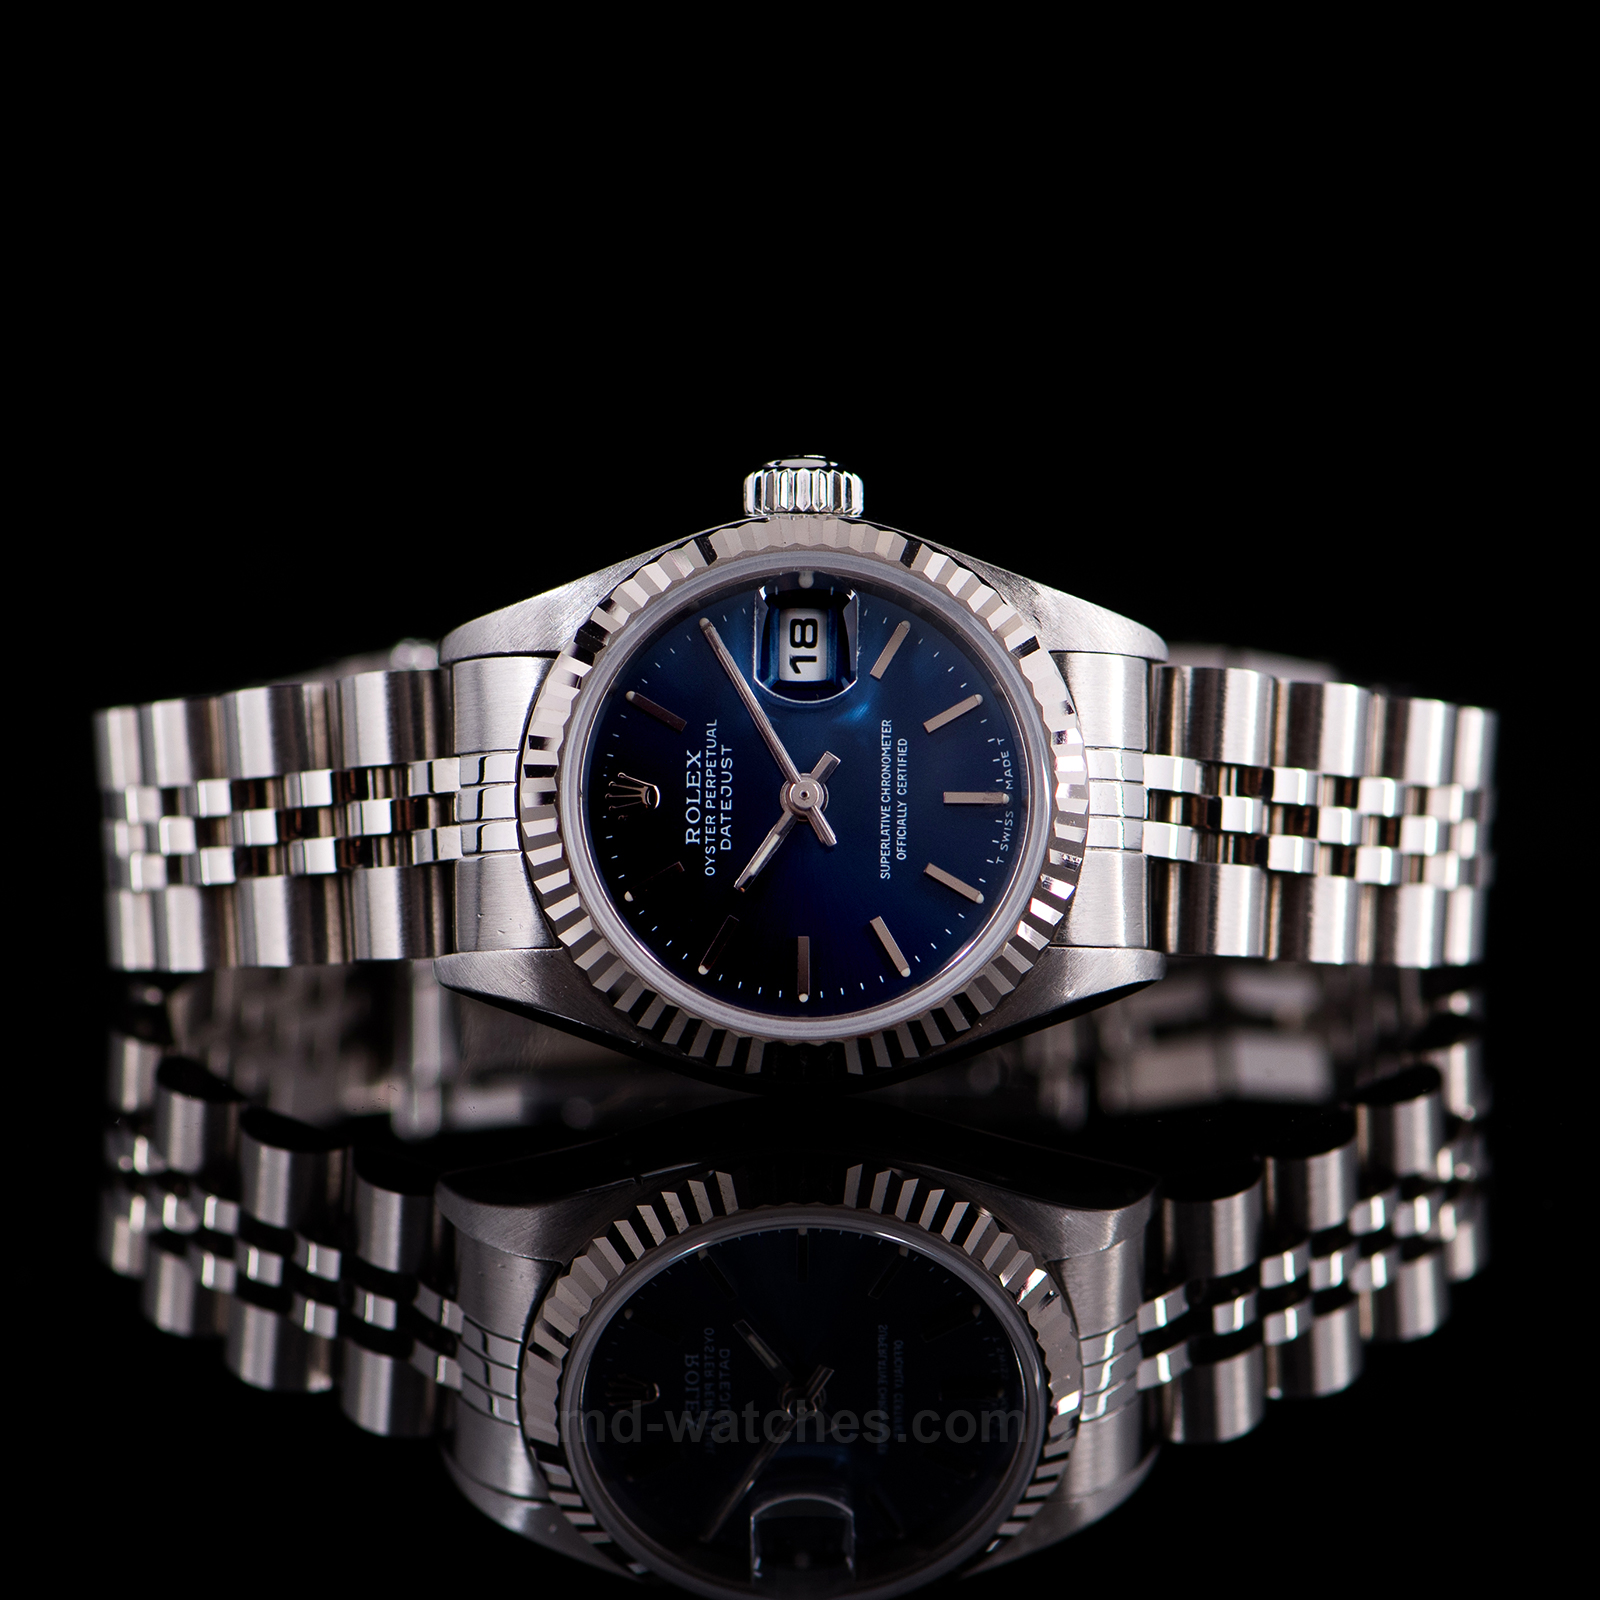 rolex oyster perpetual datejust blue dial price